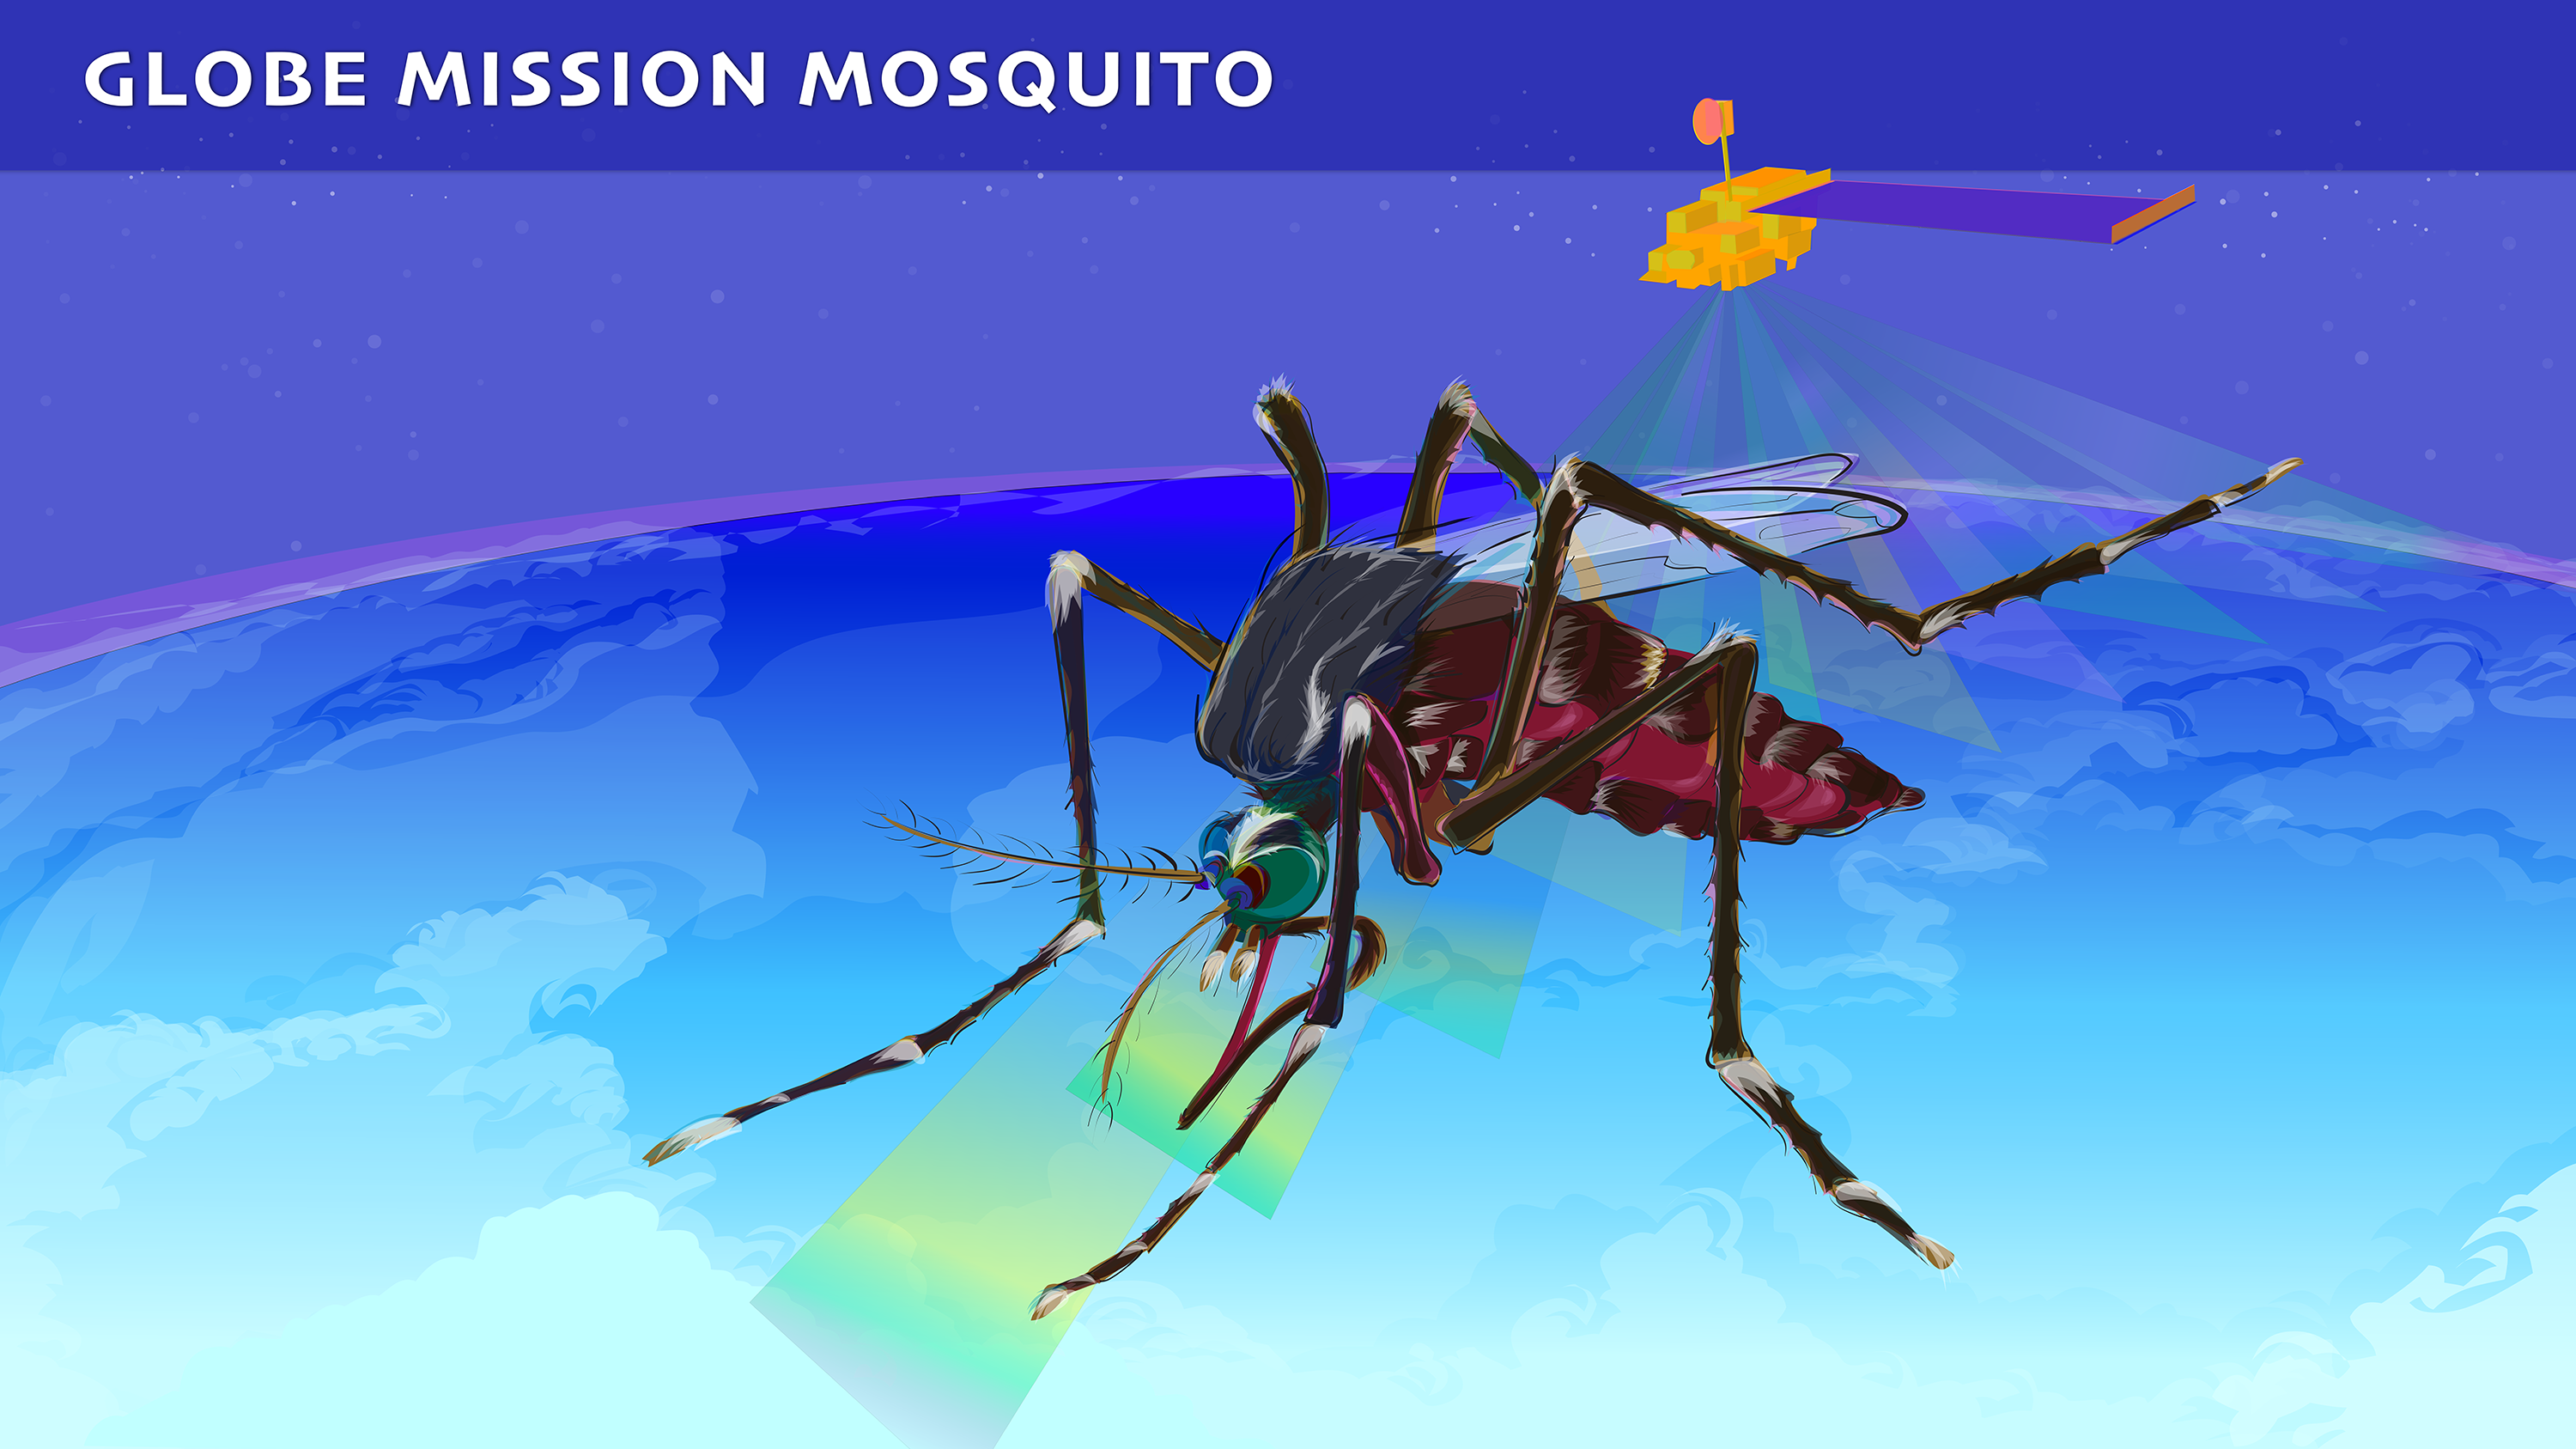 GLOBE Mission Mosquito - Image credit to Jen Paul Glaser @ scribearts.org